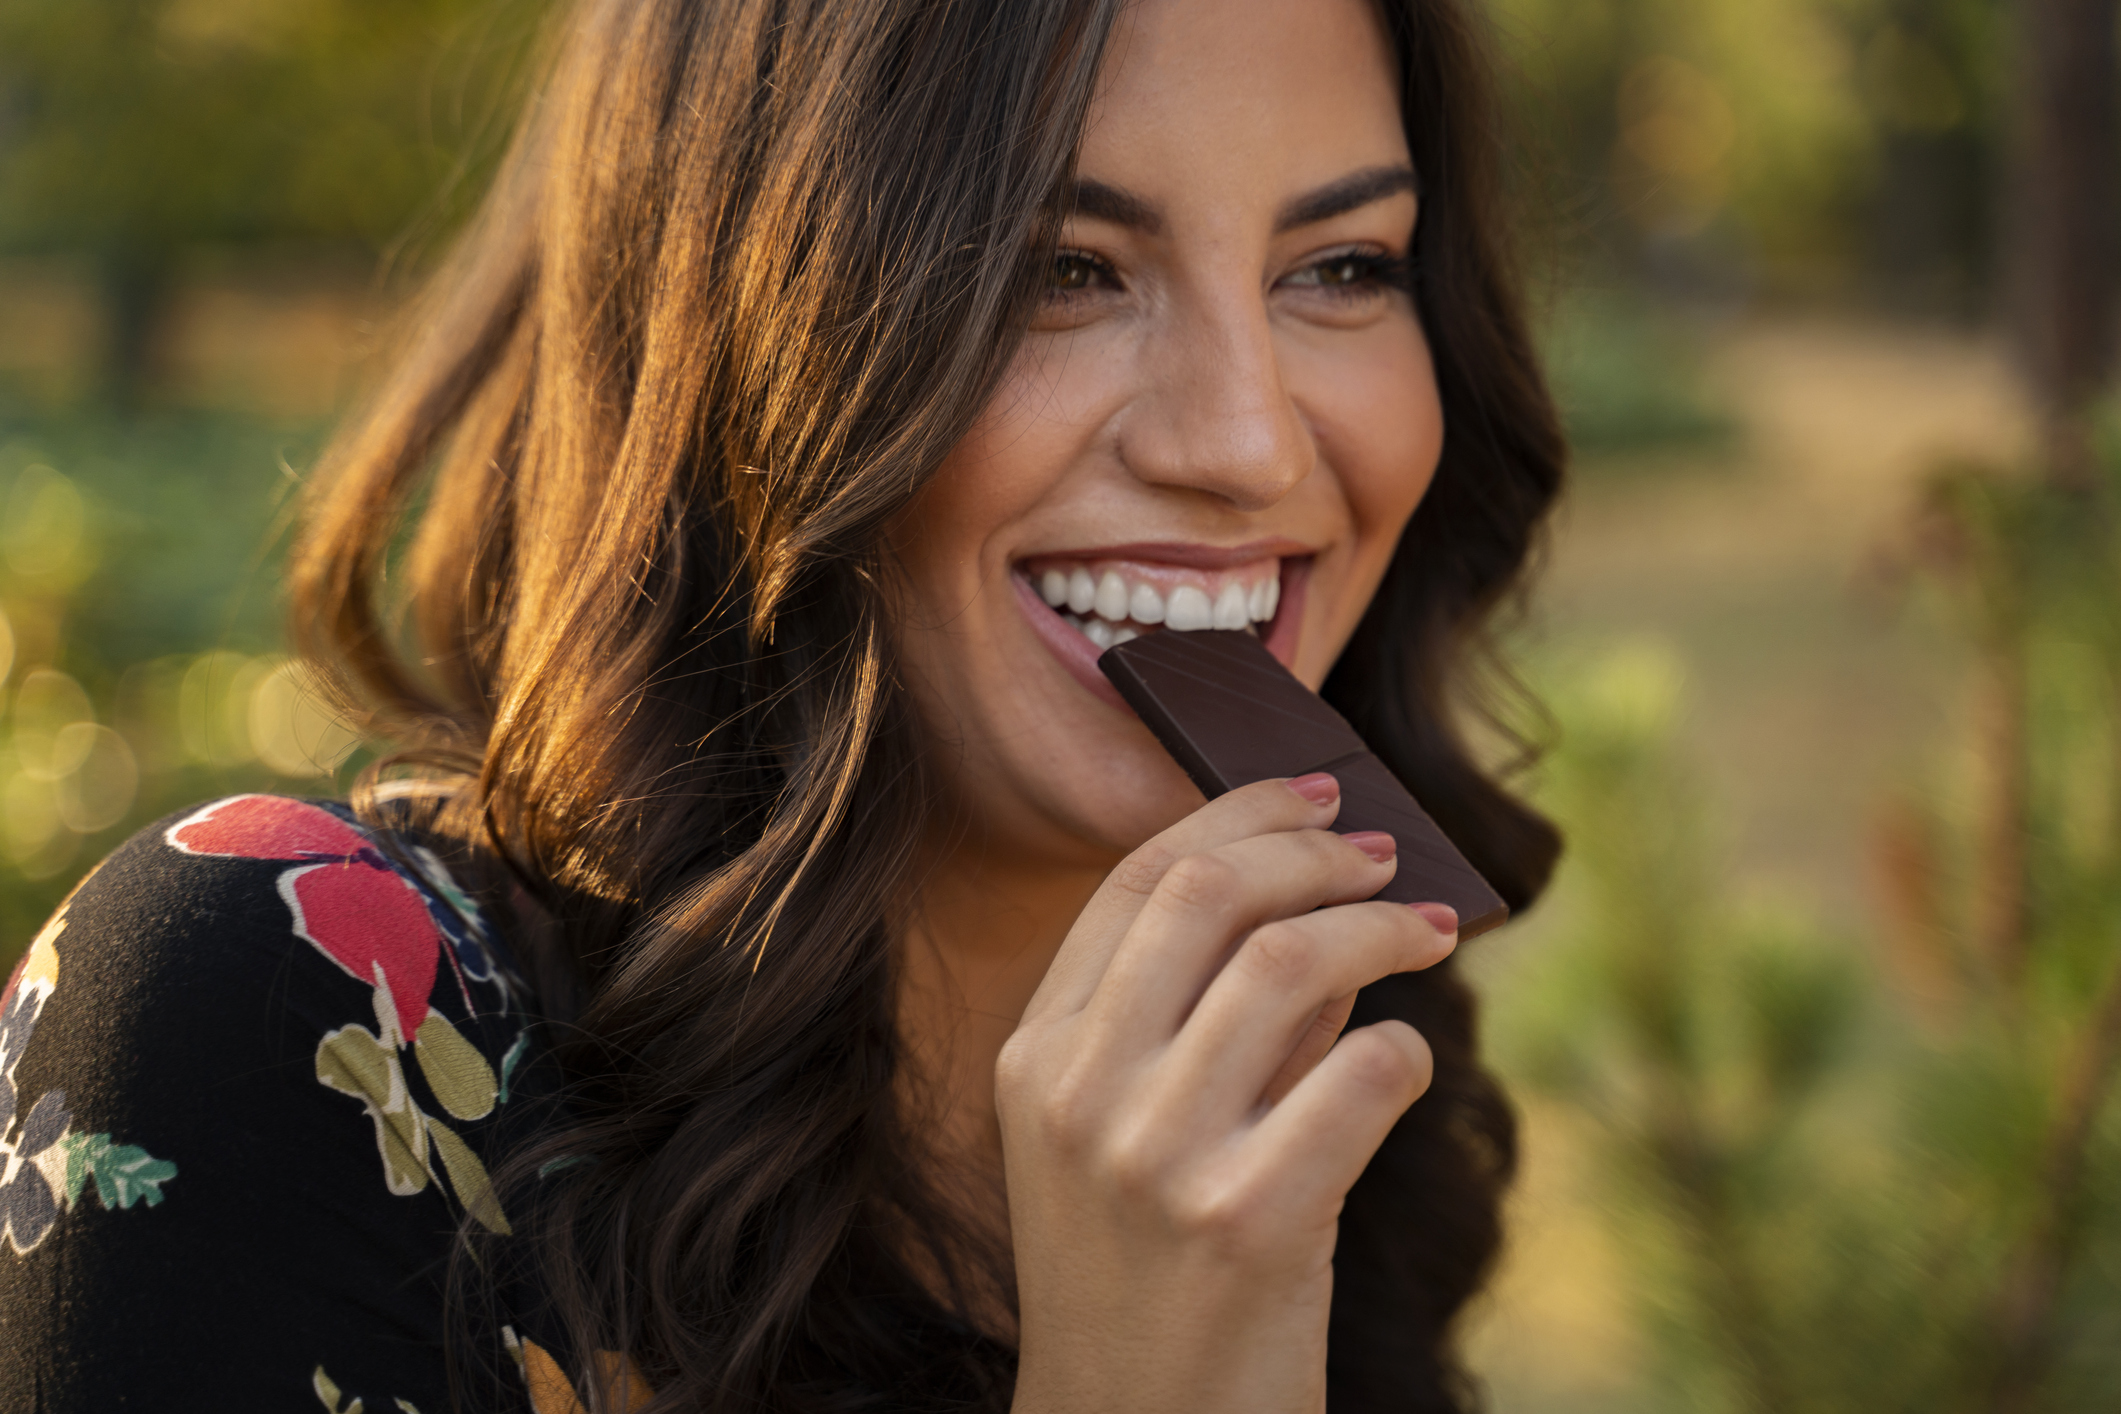 For more heart protection, eat more chocolate